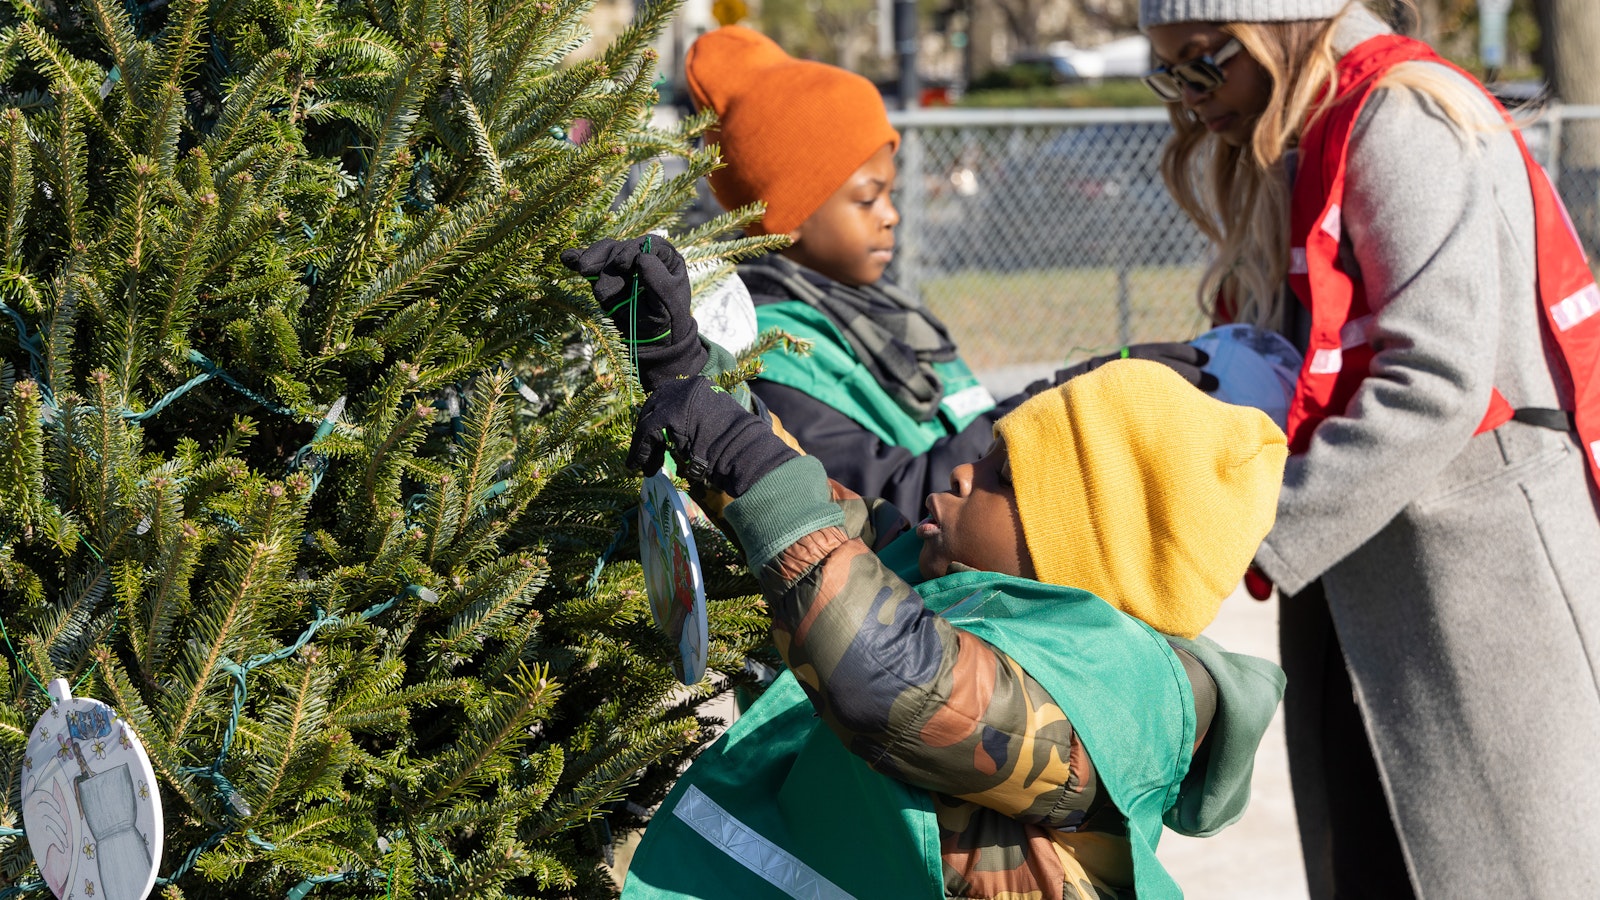 Volunteers decorate Christmas trees in front of the White House for the 2022 National Christmas Tree Lighting.